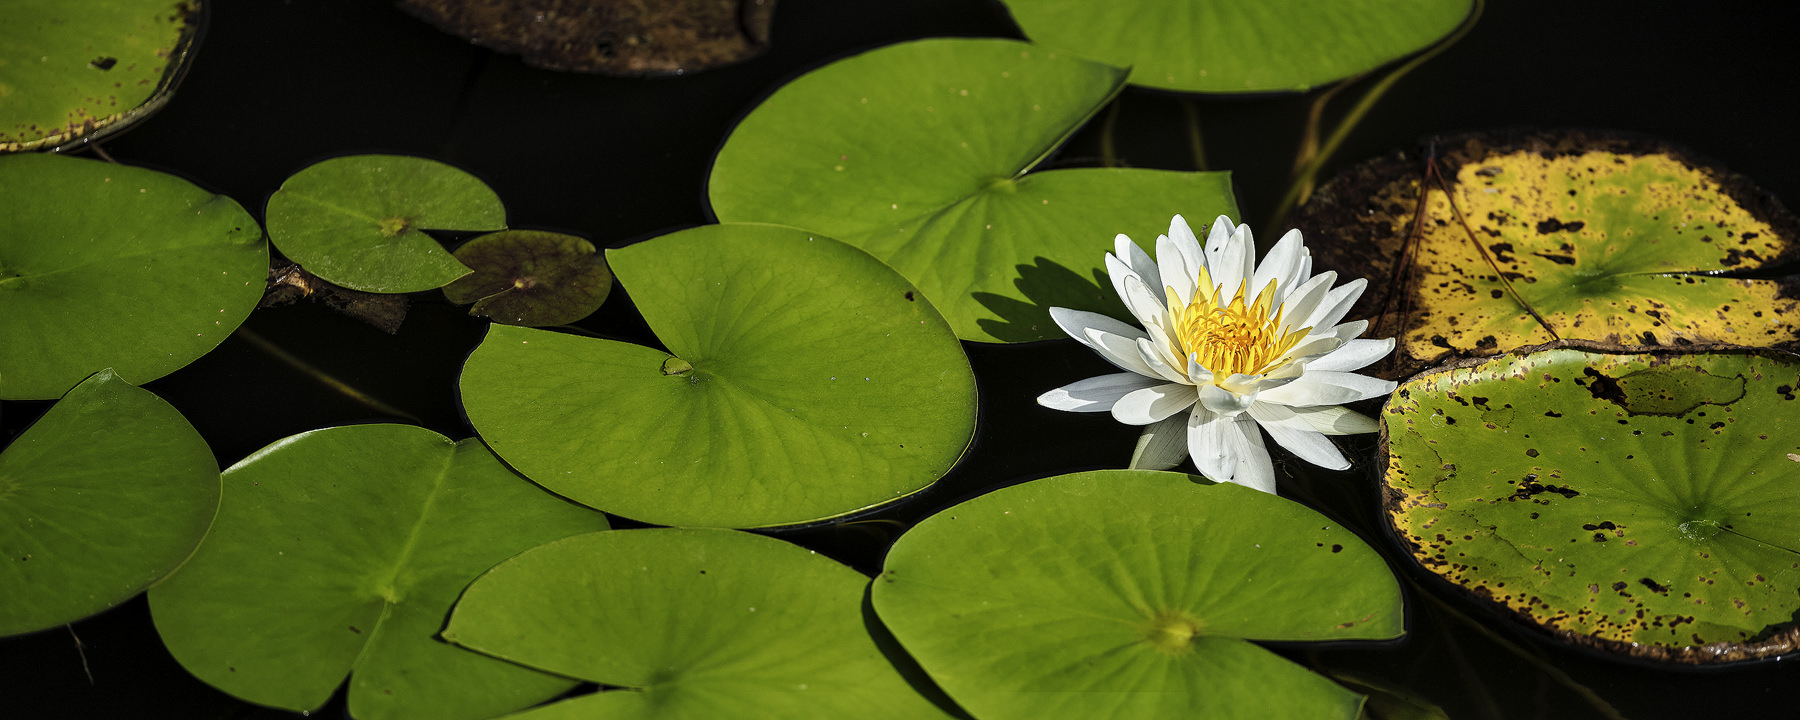 A colorful Water Lily sitting in the late morning sun accentuated by the yellows and greens.﻿